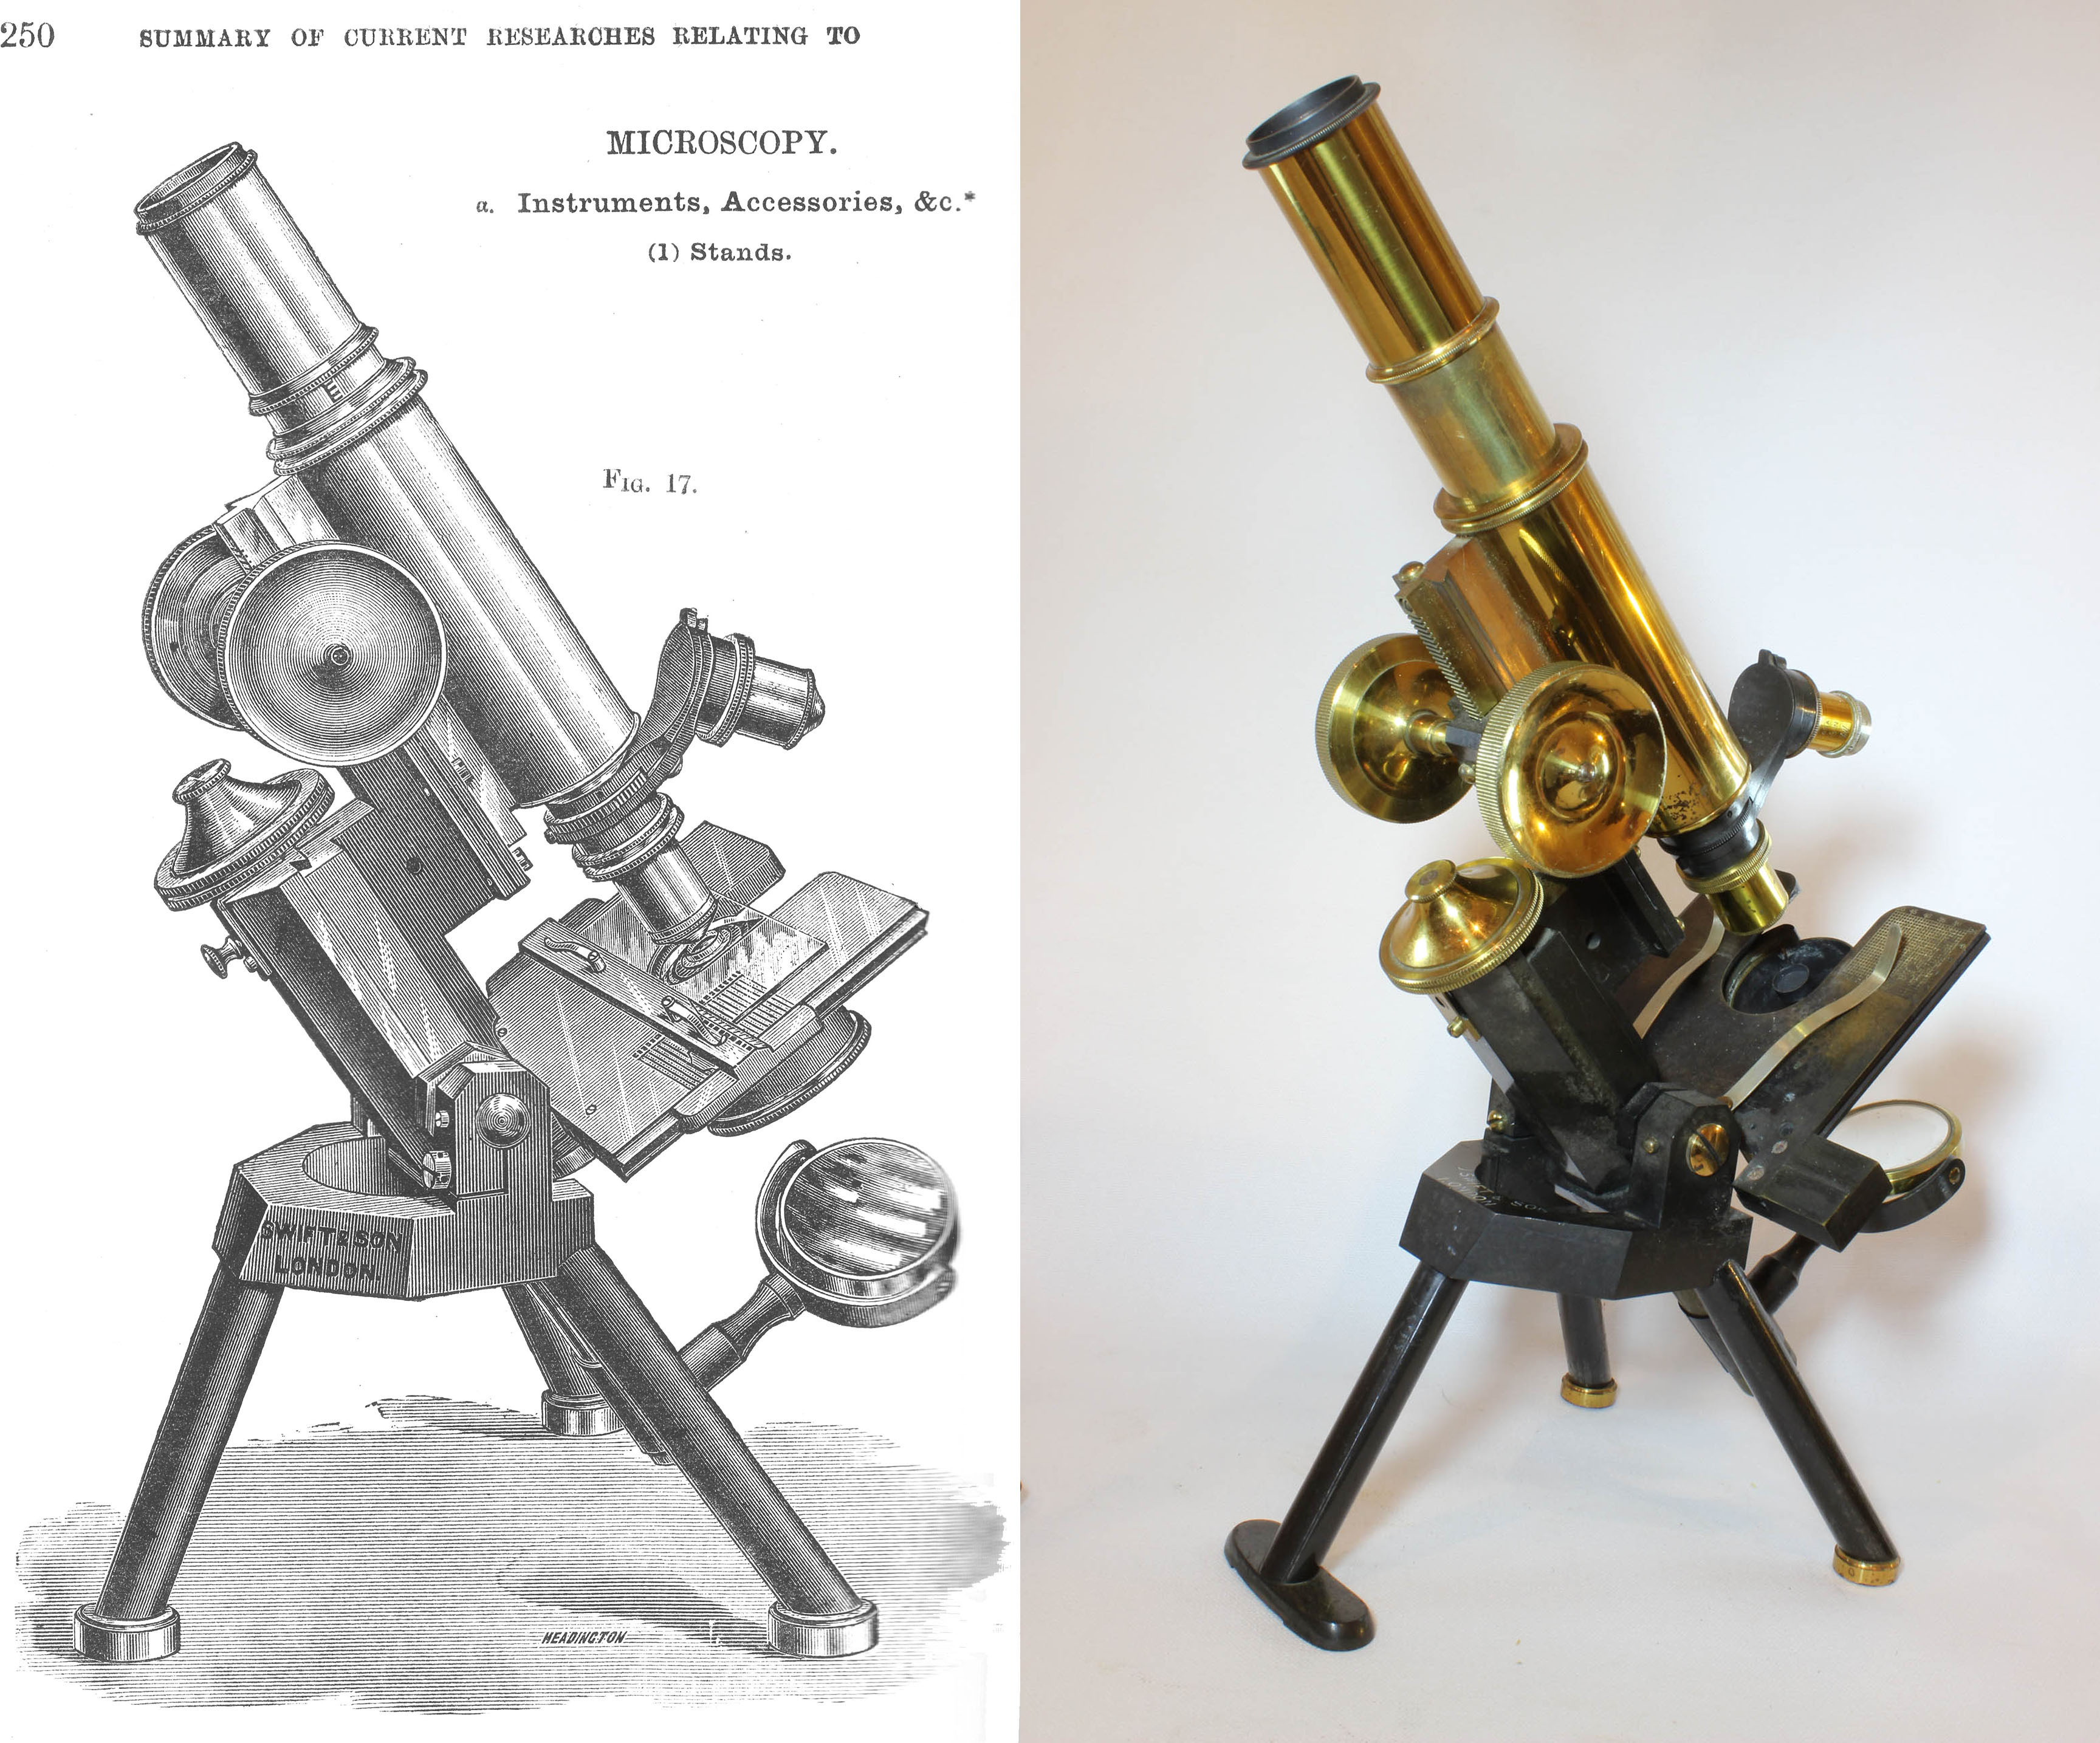 Swift New Histological and Physiological Microscope Engraving from PRMS 1894, next to actual microscope